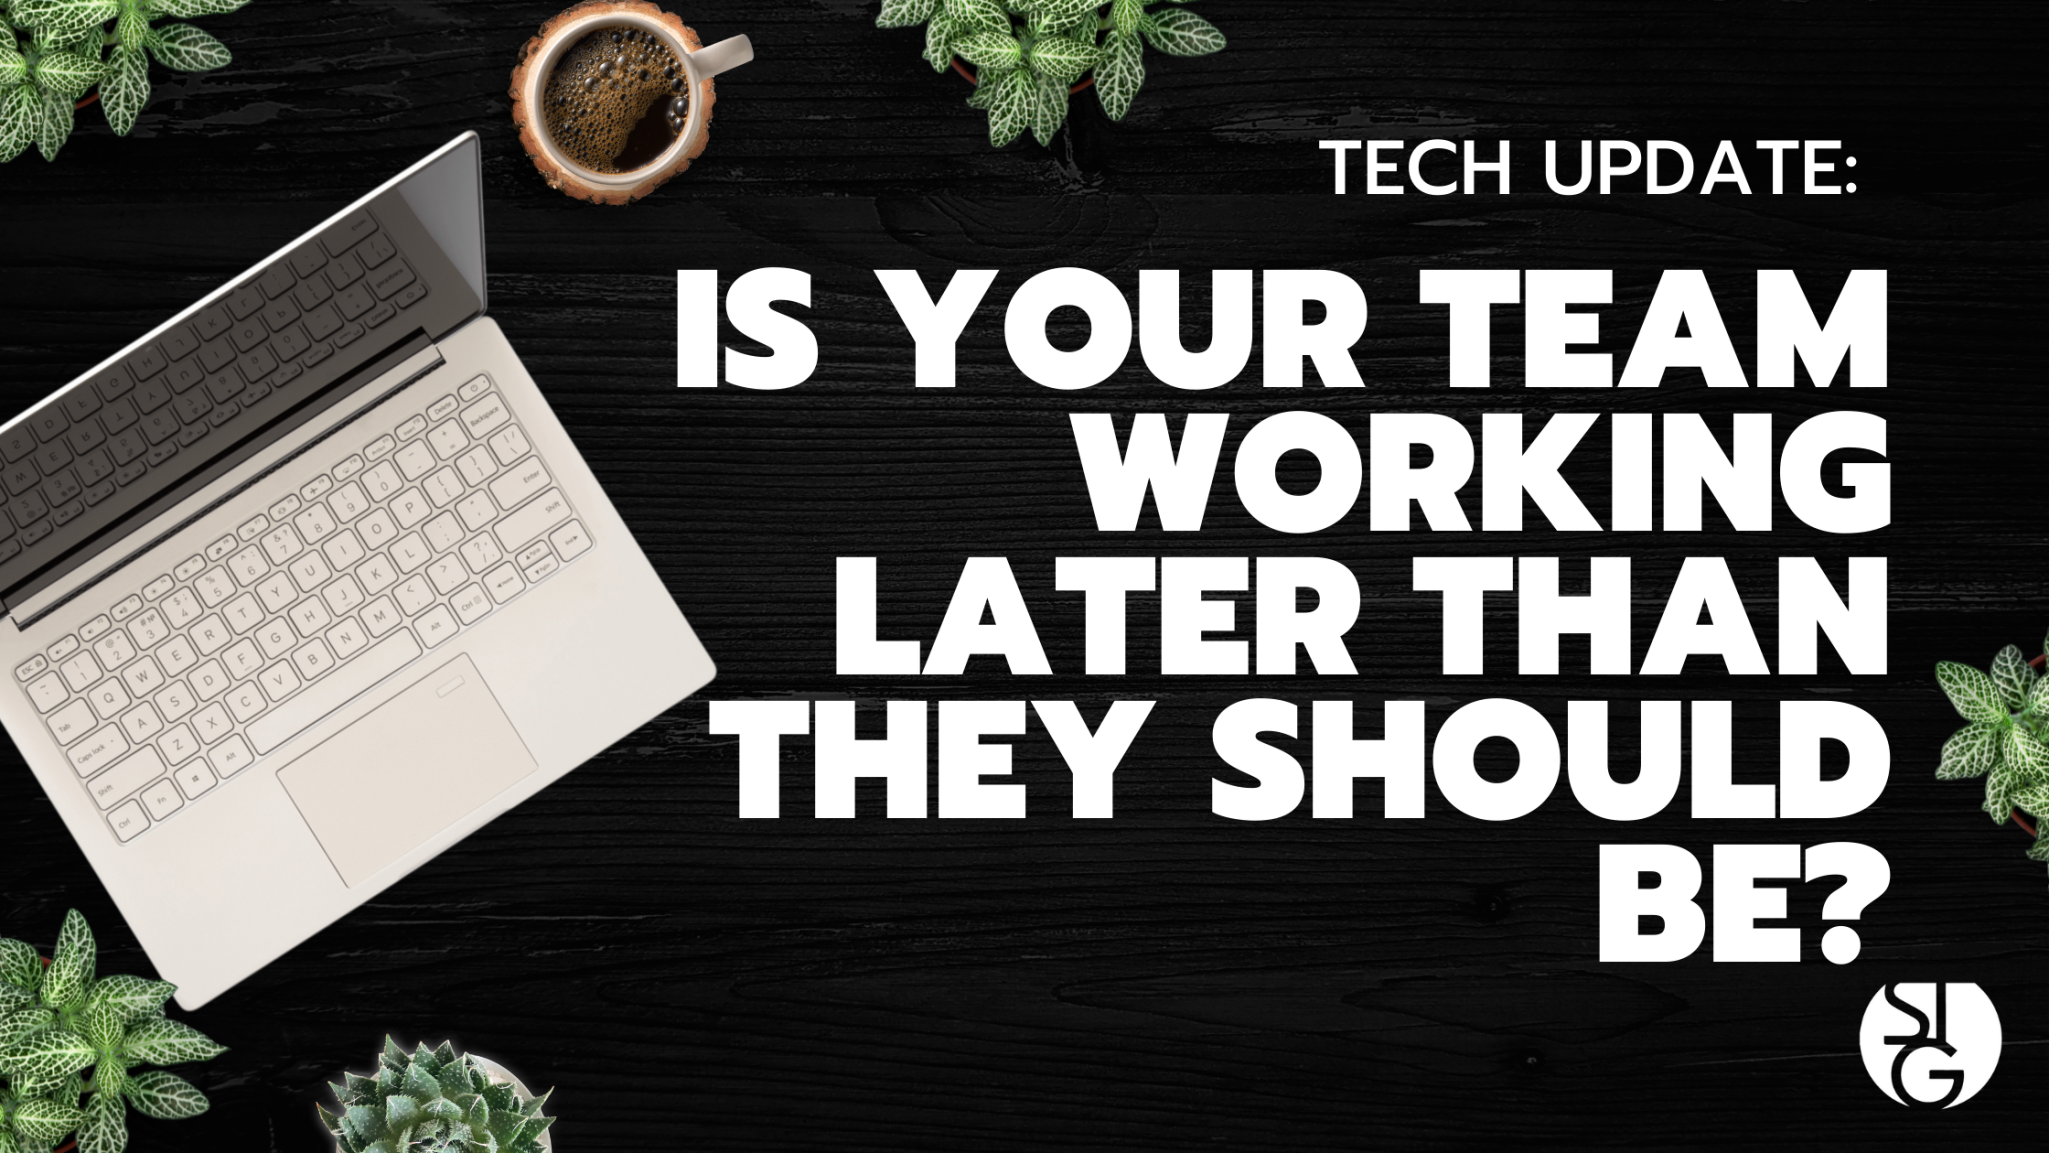 Is Your Team Working Later Than They Should Be?